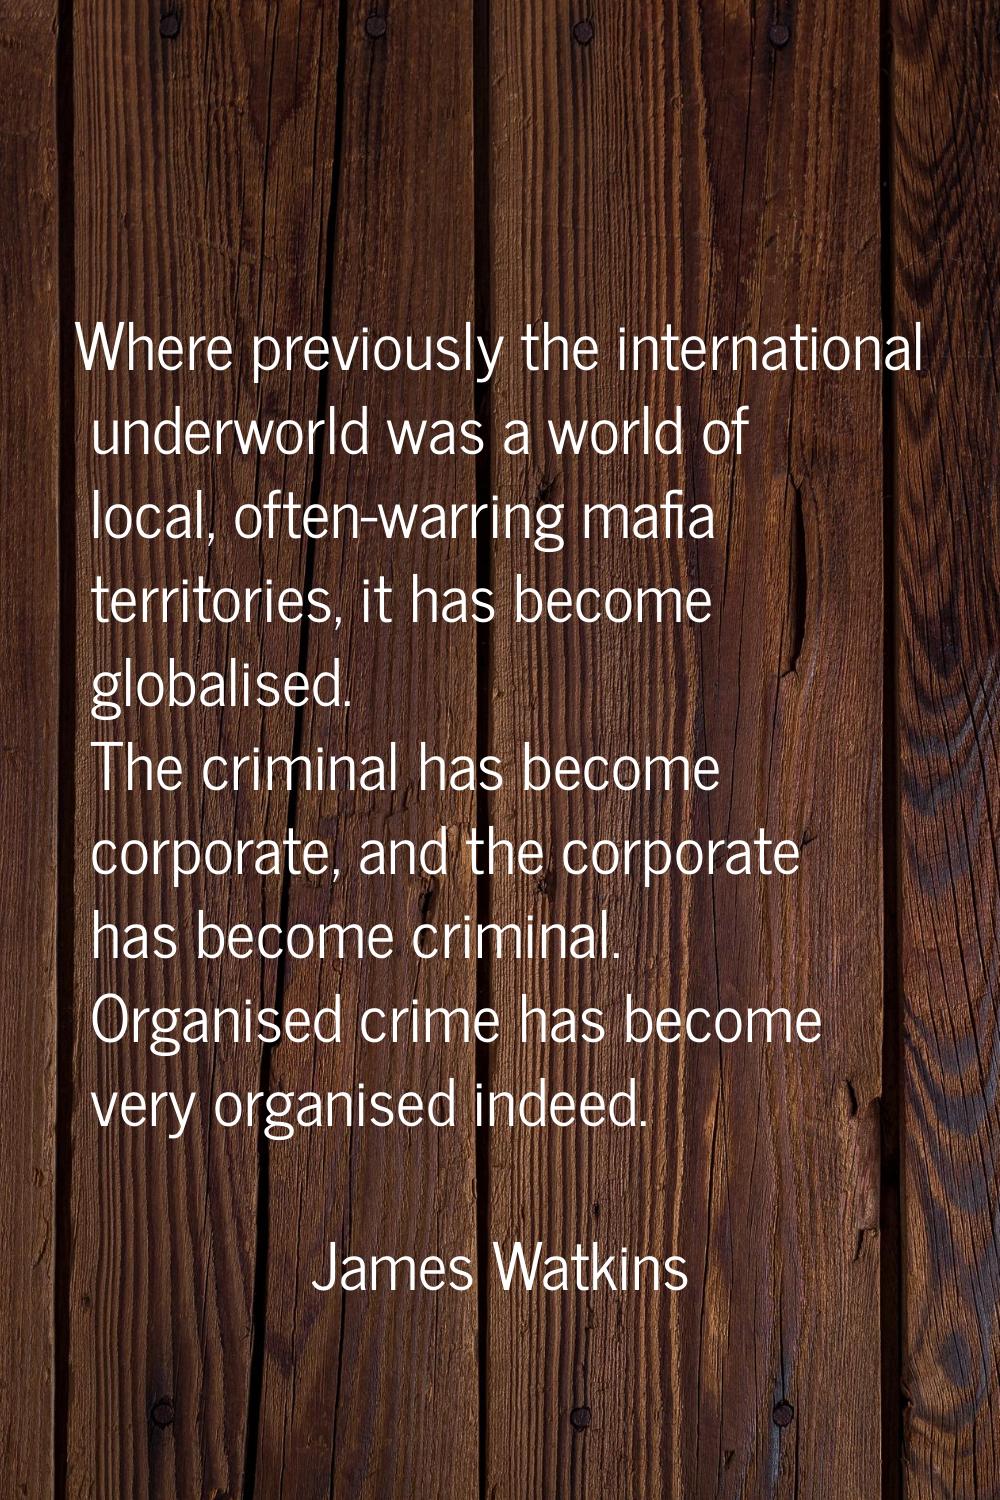 Where previously the international underworld was a world of local, often-warring mafia territories